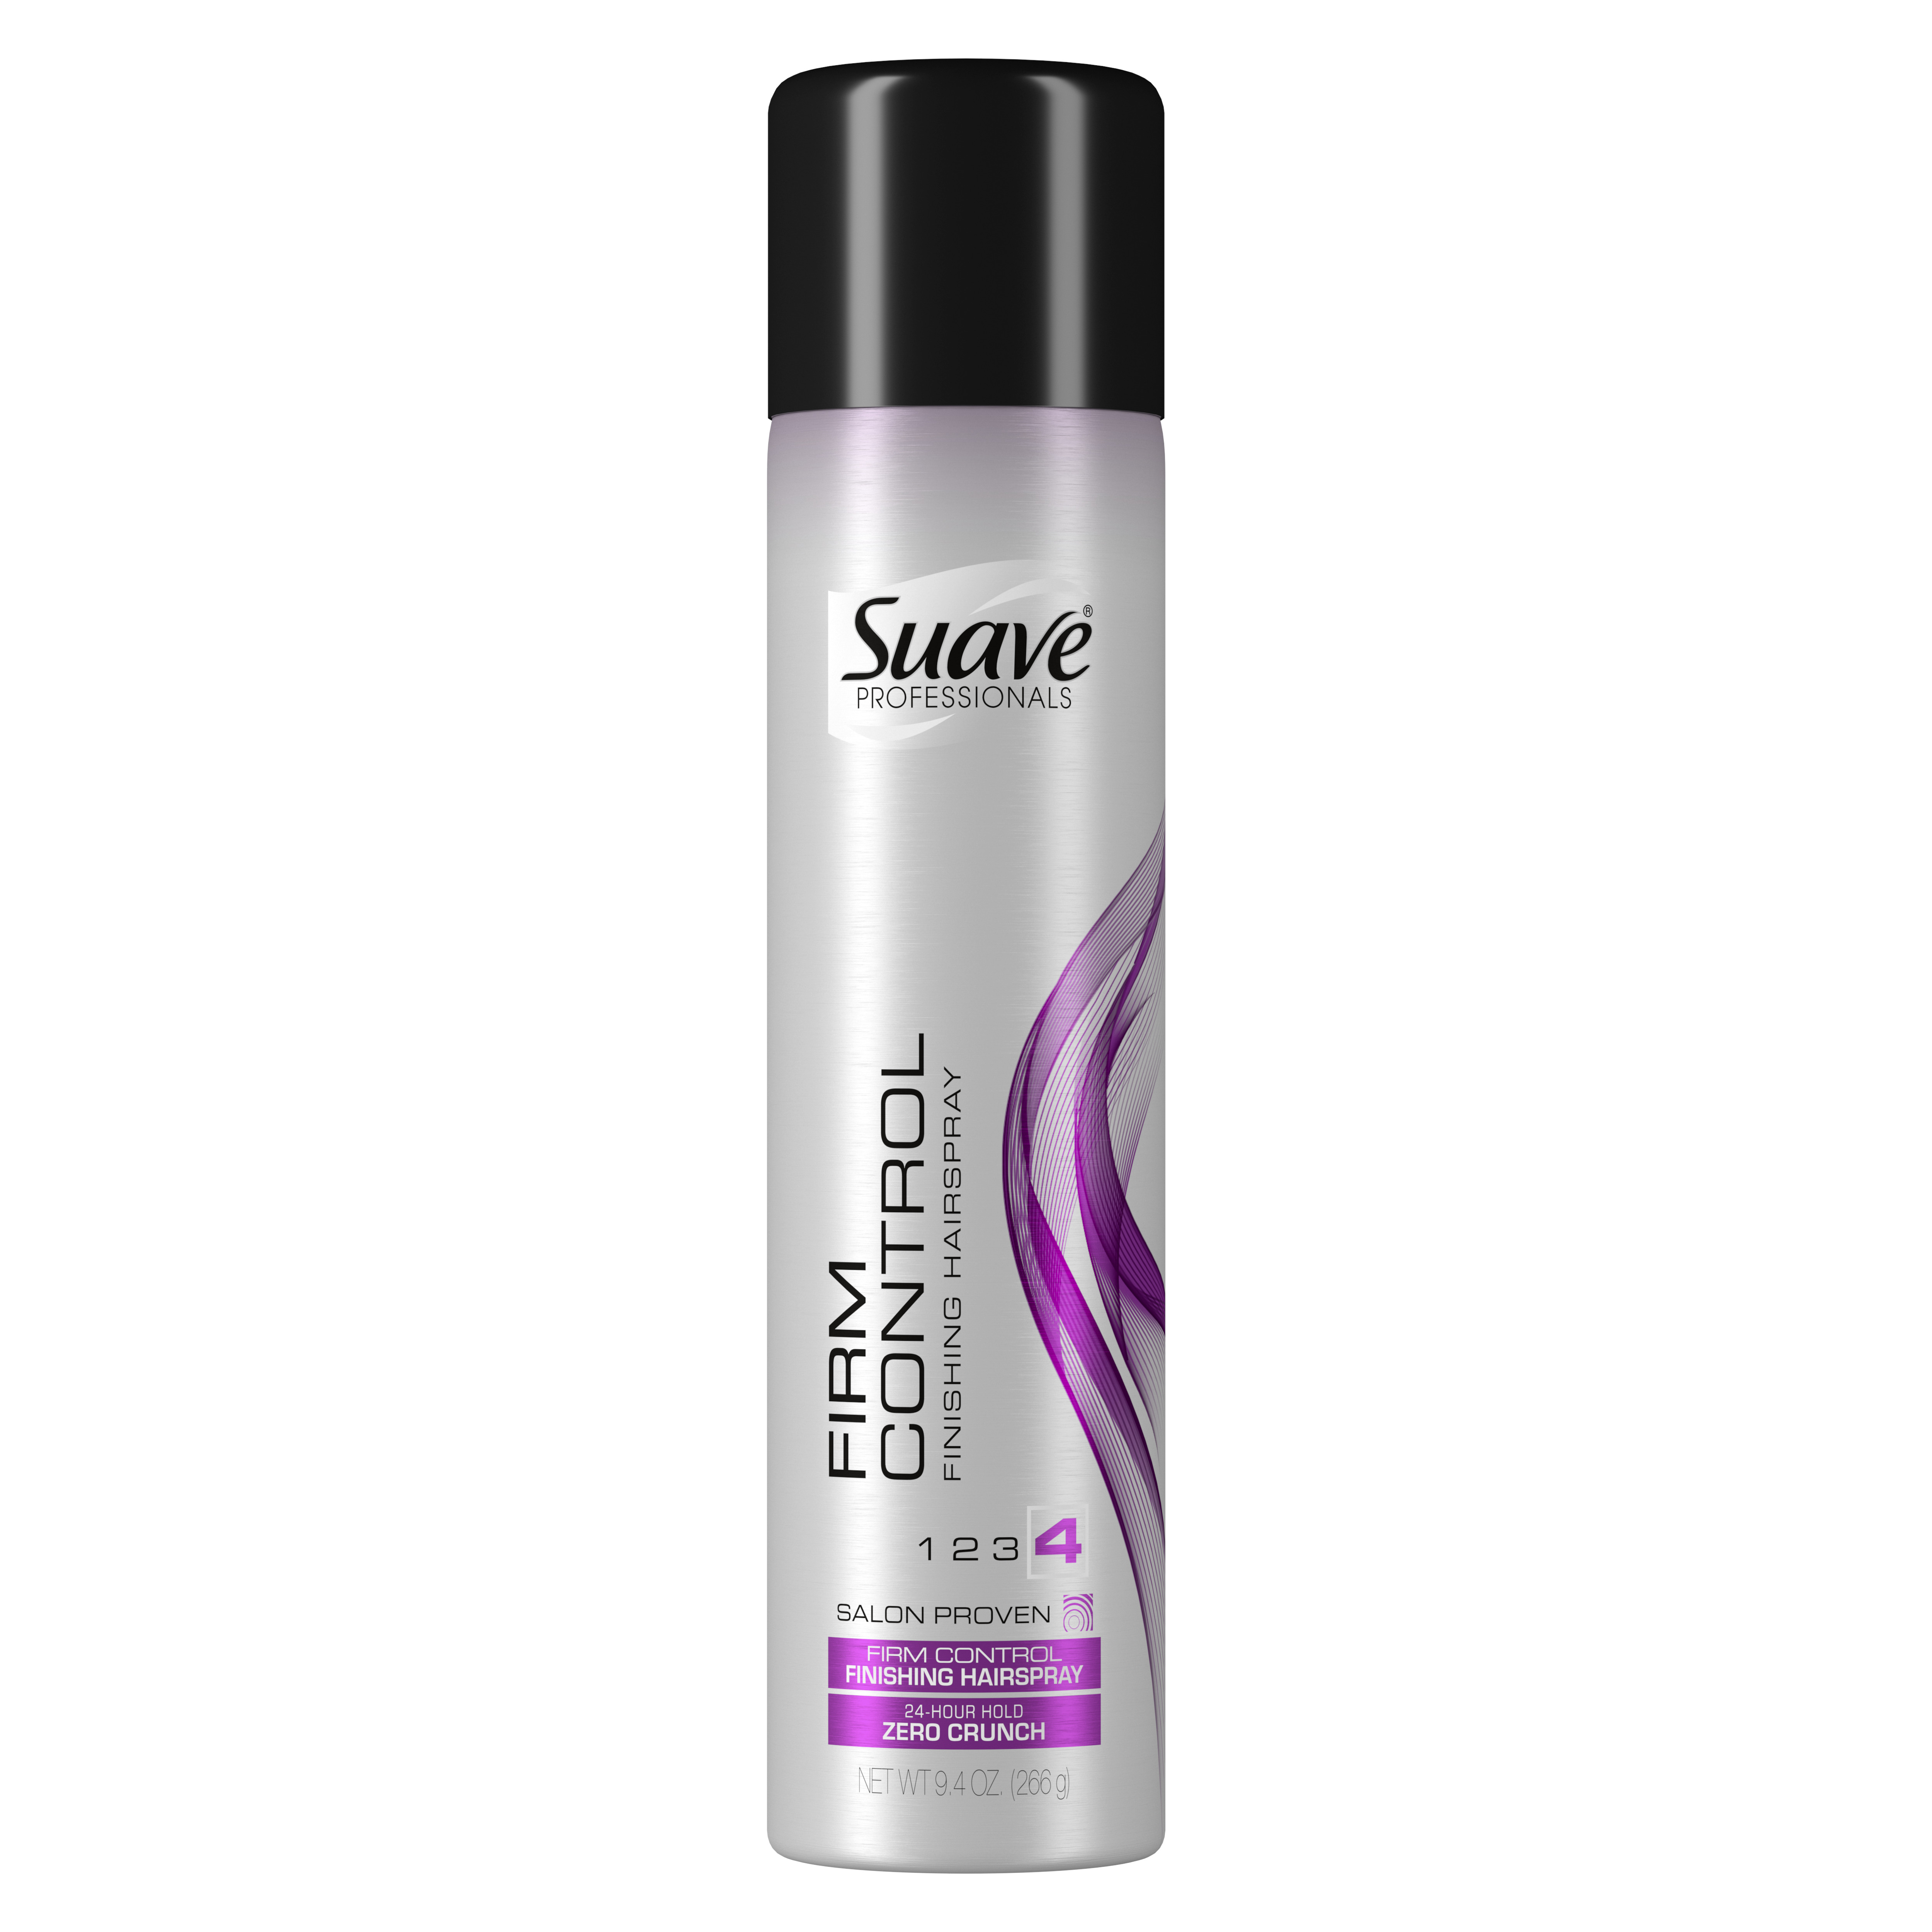 Suave Professionals Hairspray Firm Control Finishing and Hair Styling Hairspray&nbsp;9.4 oz&nbsp; - image 2 of 10